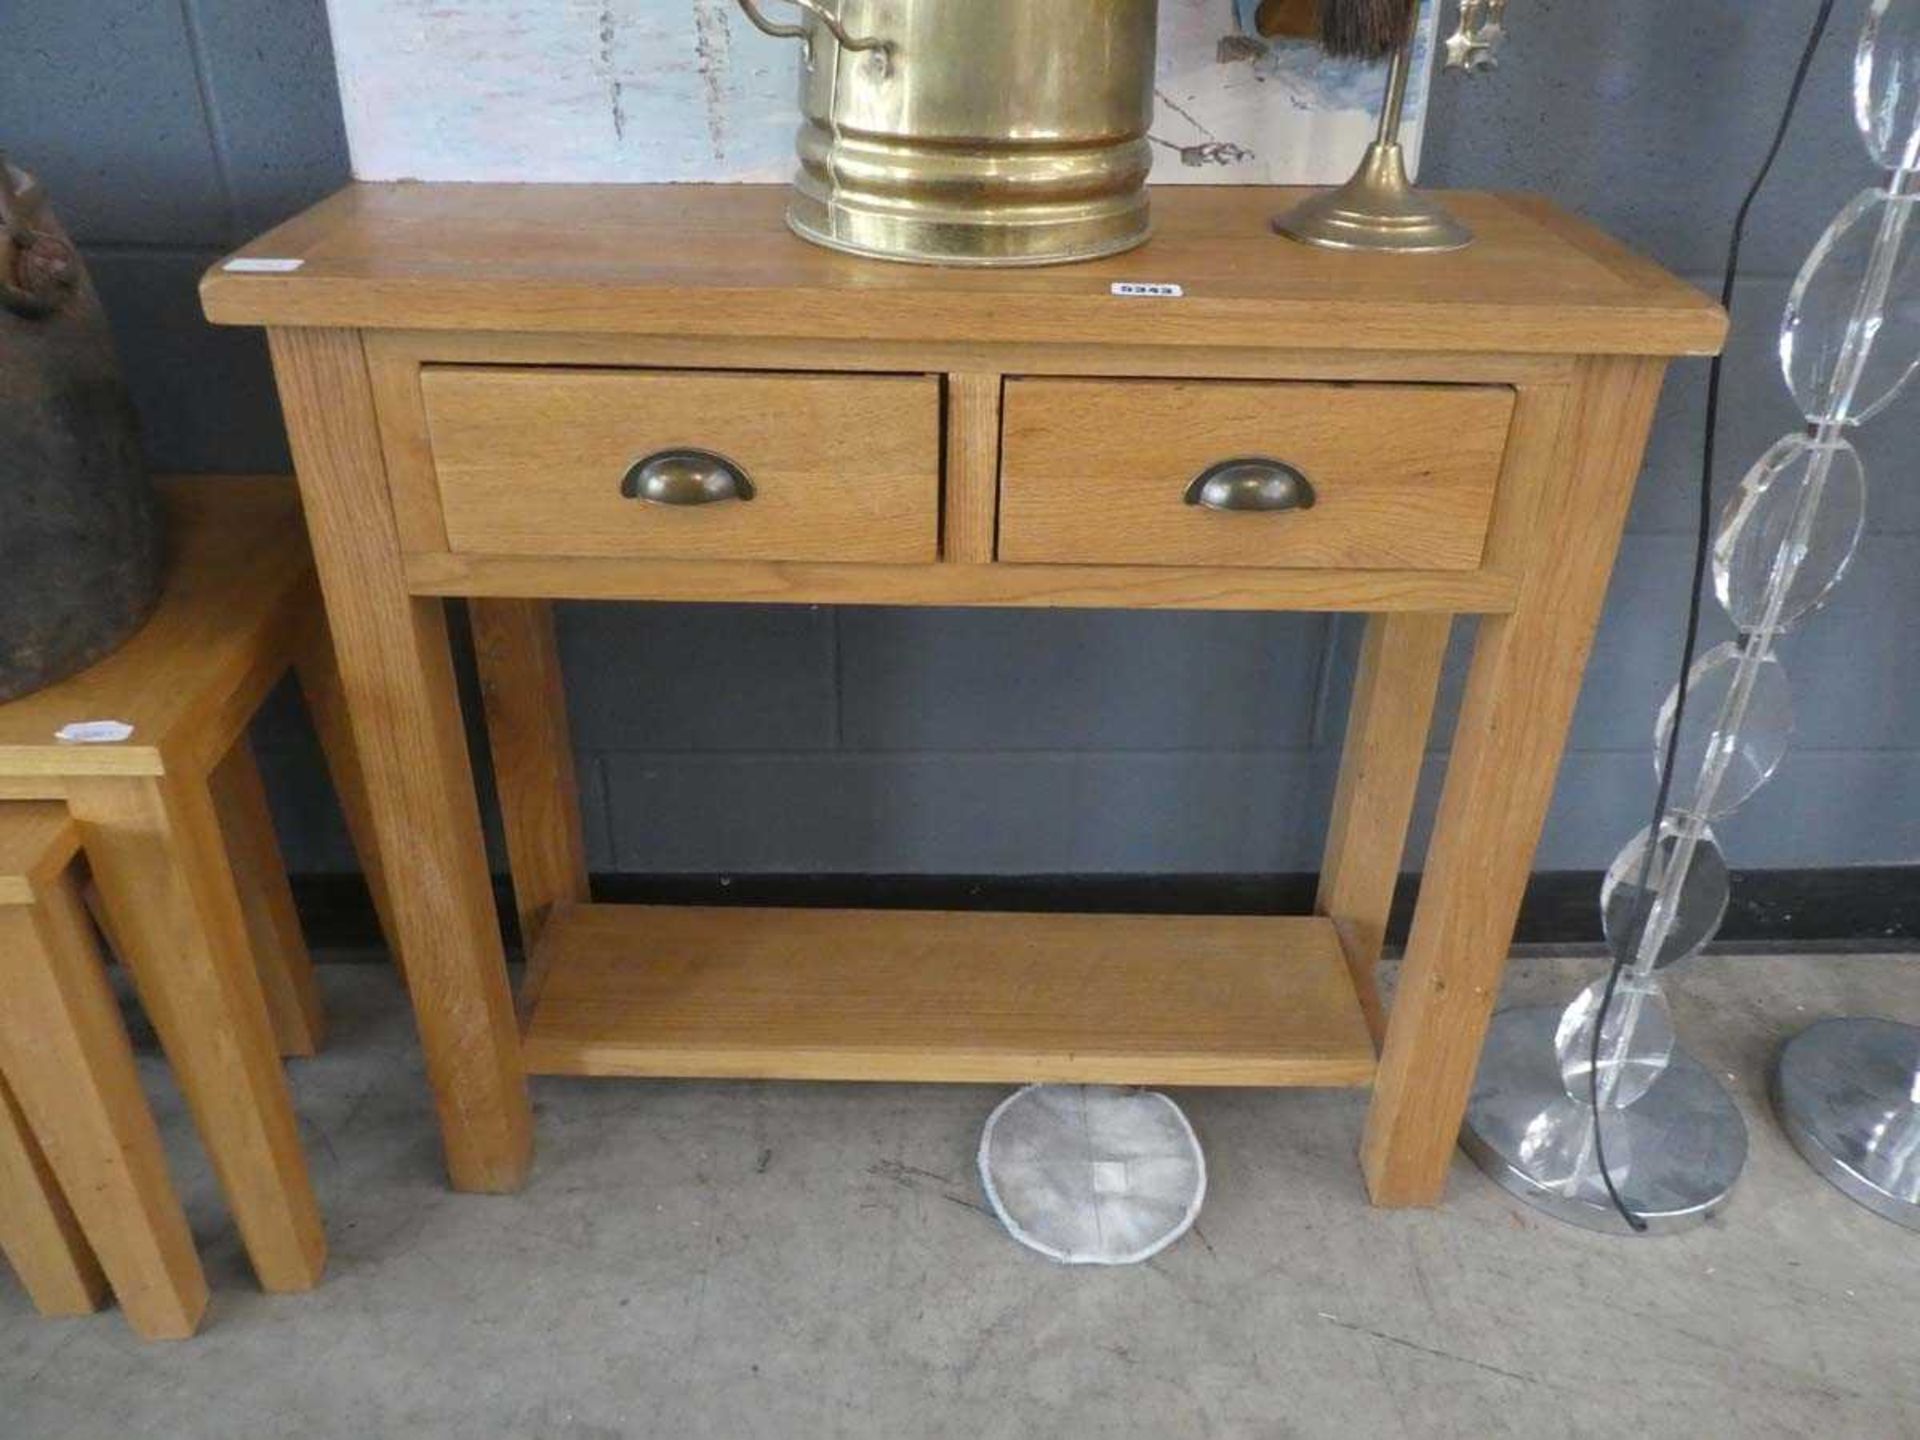 Oak two tier side table with drawer plus a TV stand